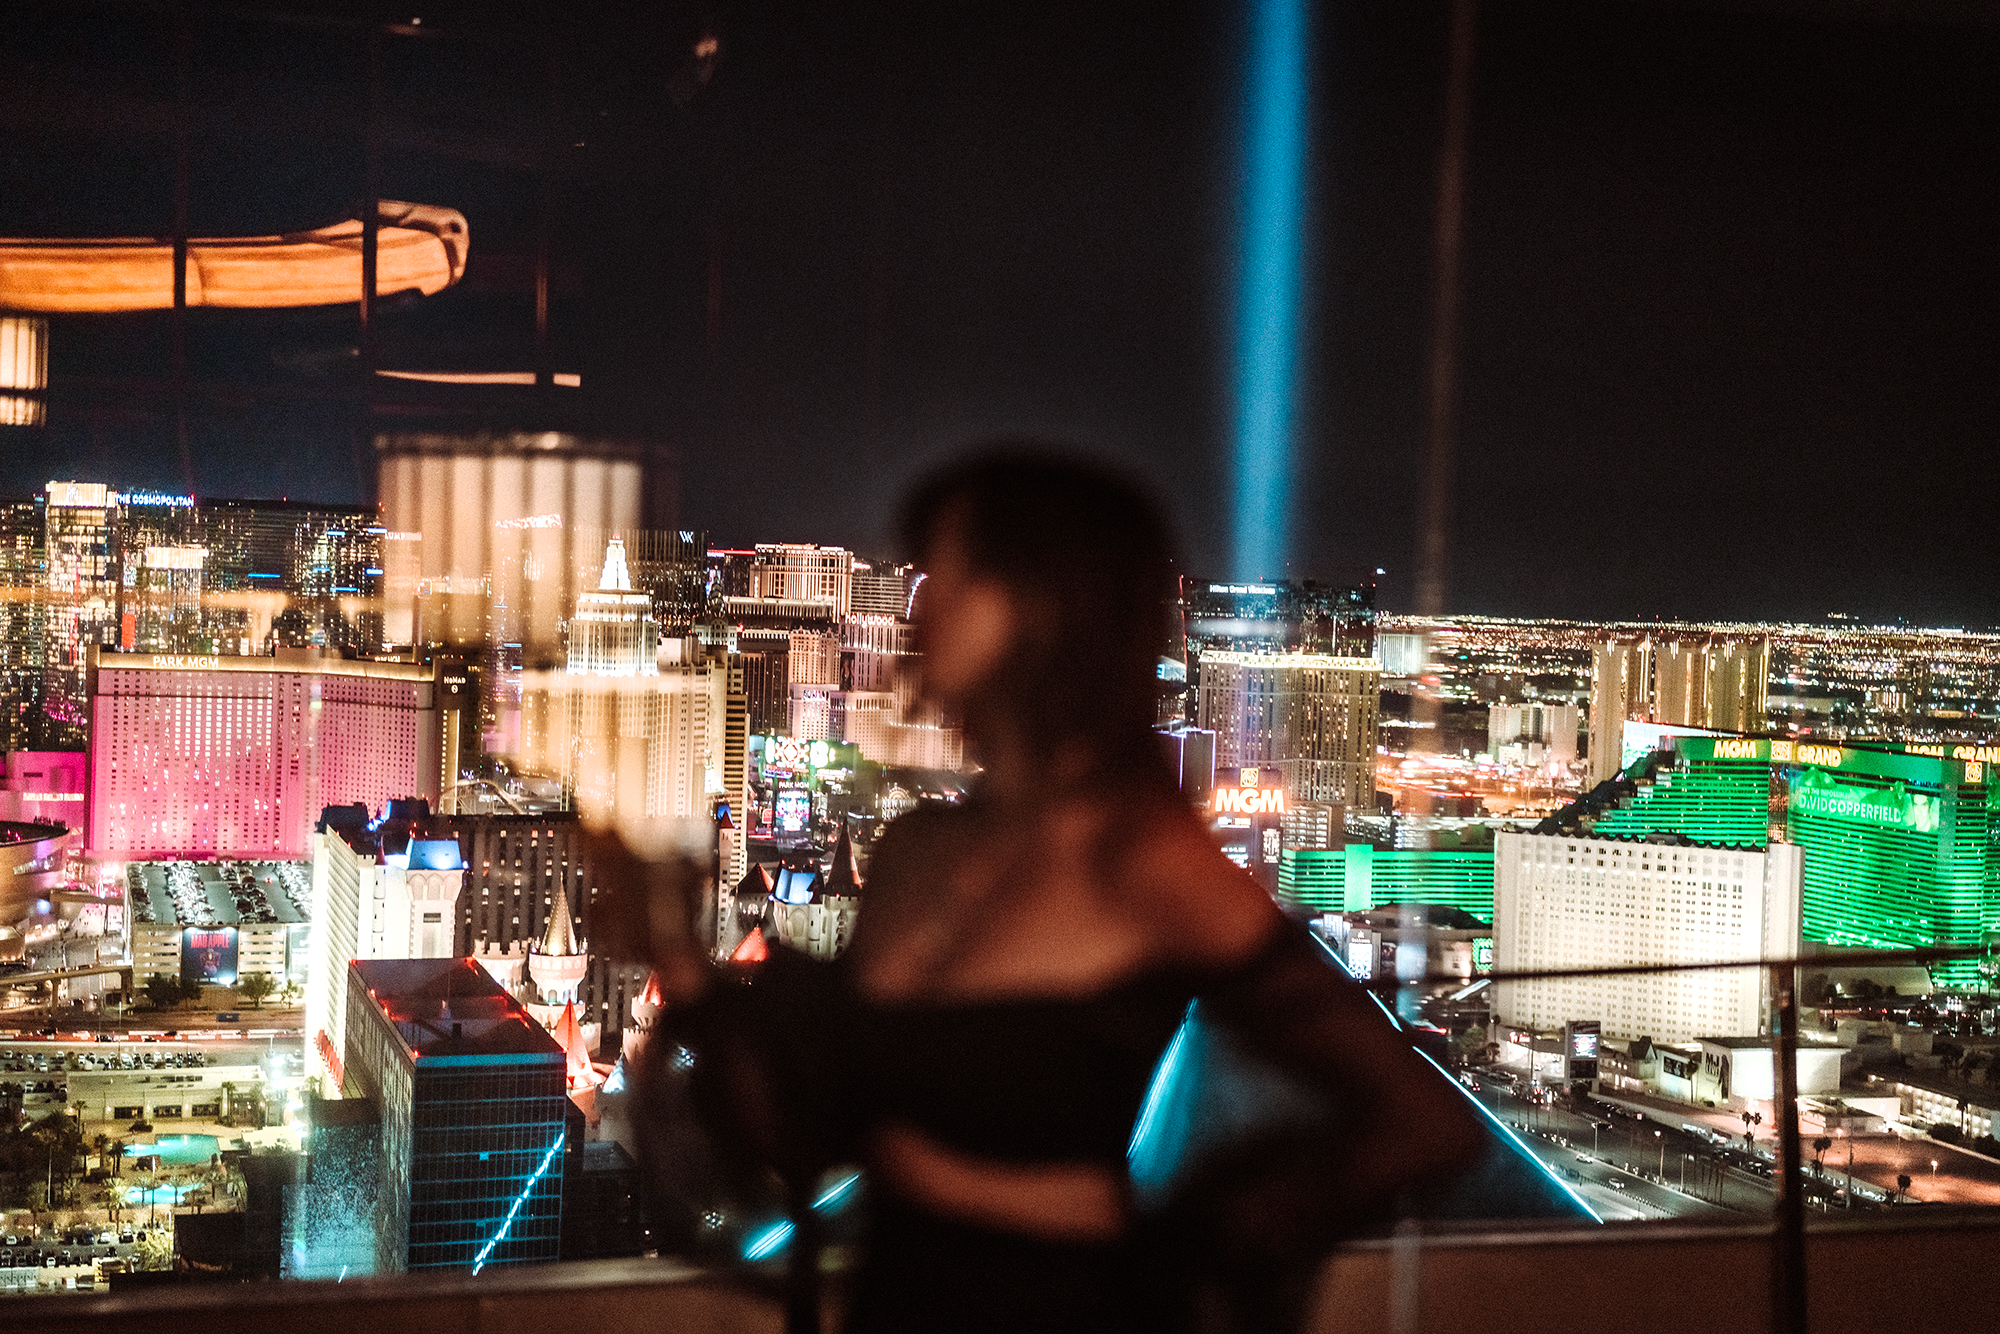 Best Views in Las Vegas: 4 Amazing Places to See the Strip at Night